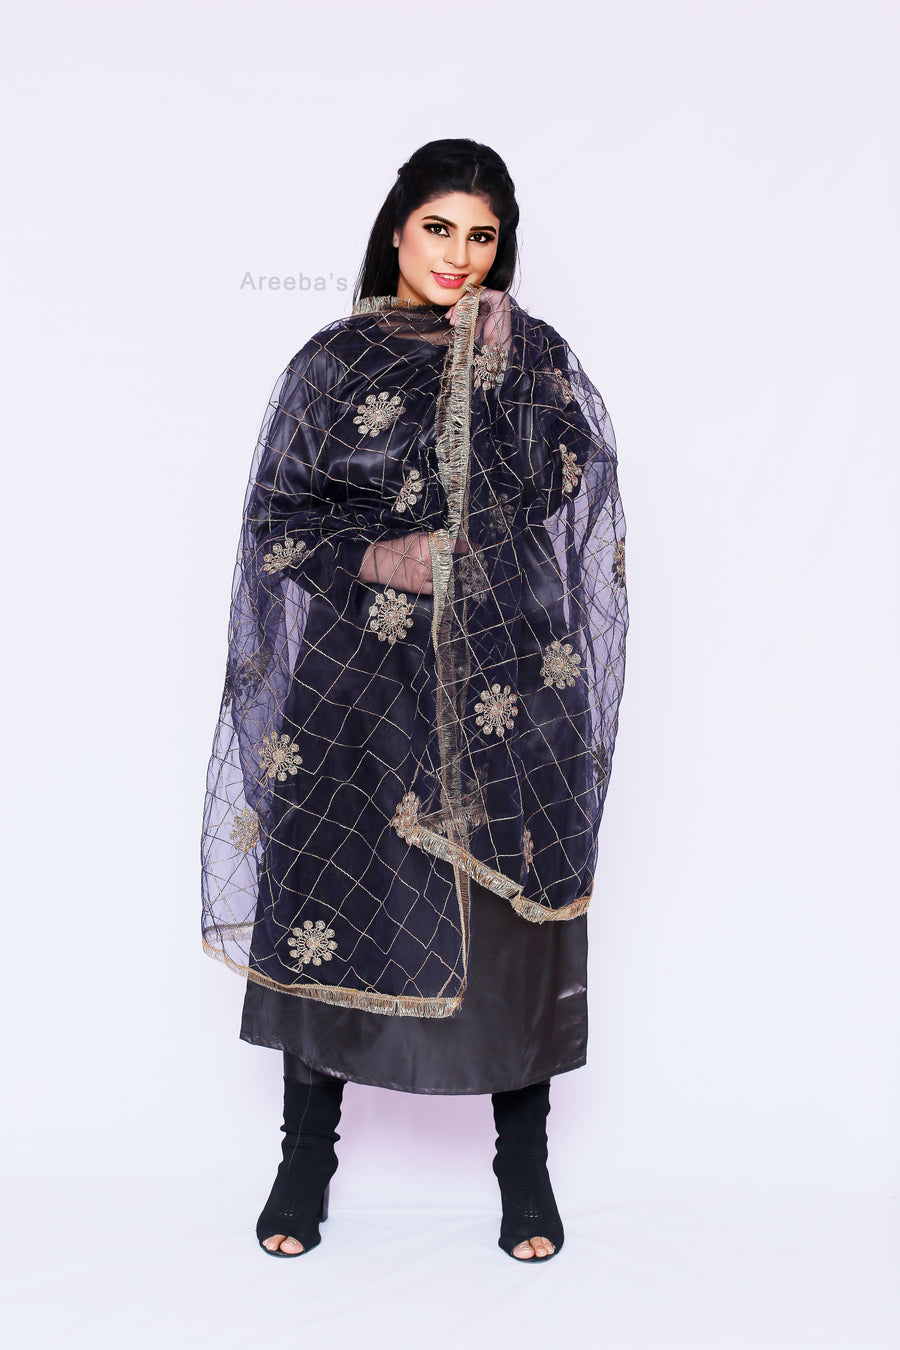 Mulled Wine net- Areeba's Couture